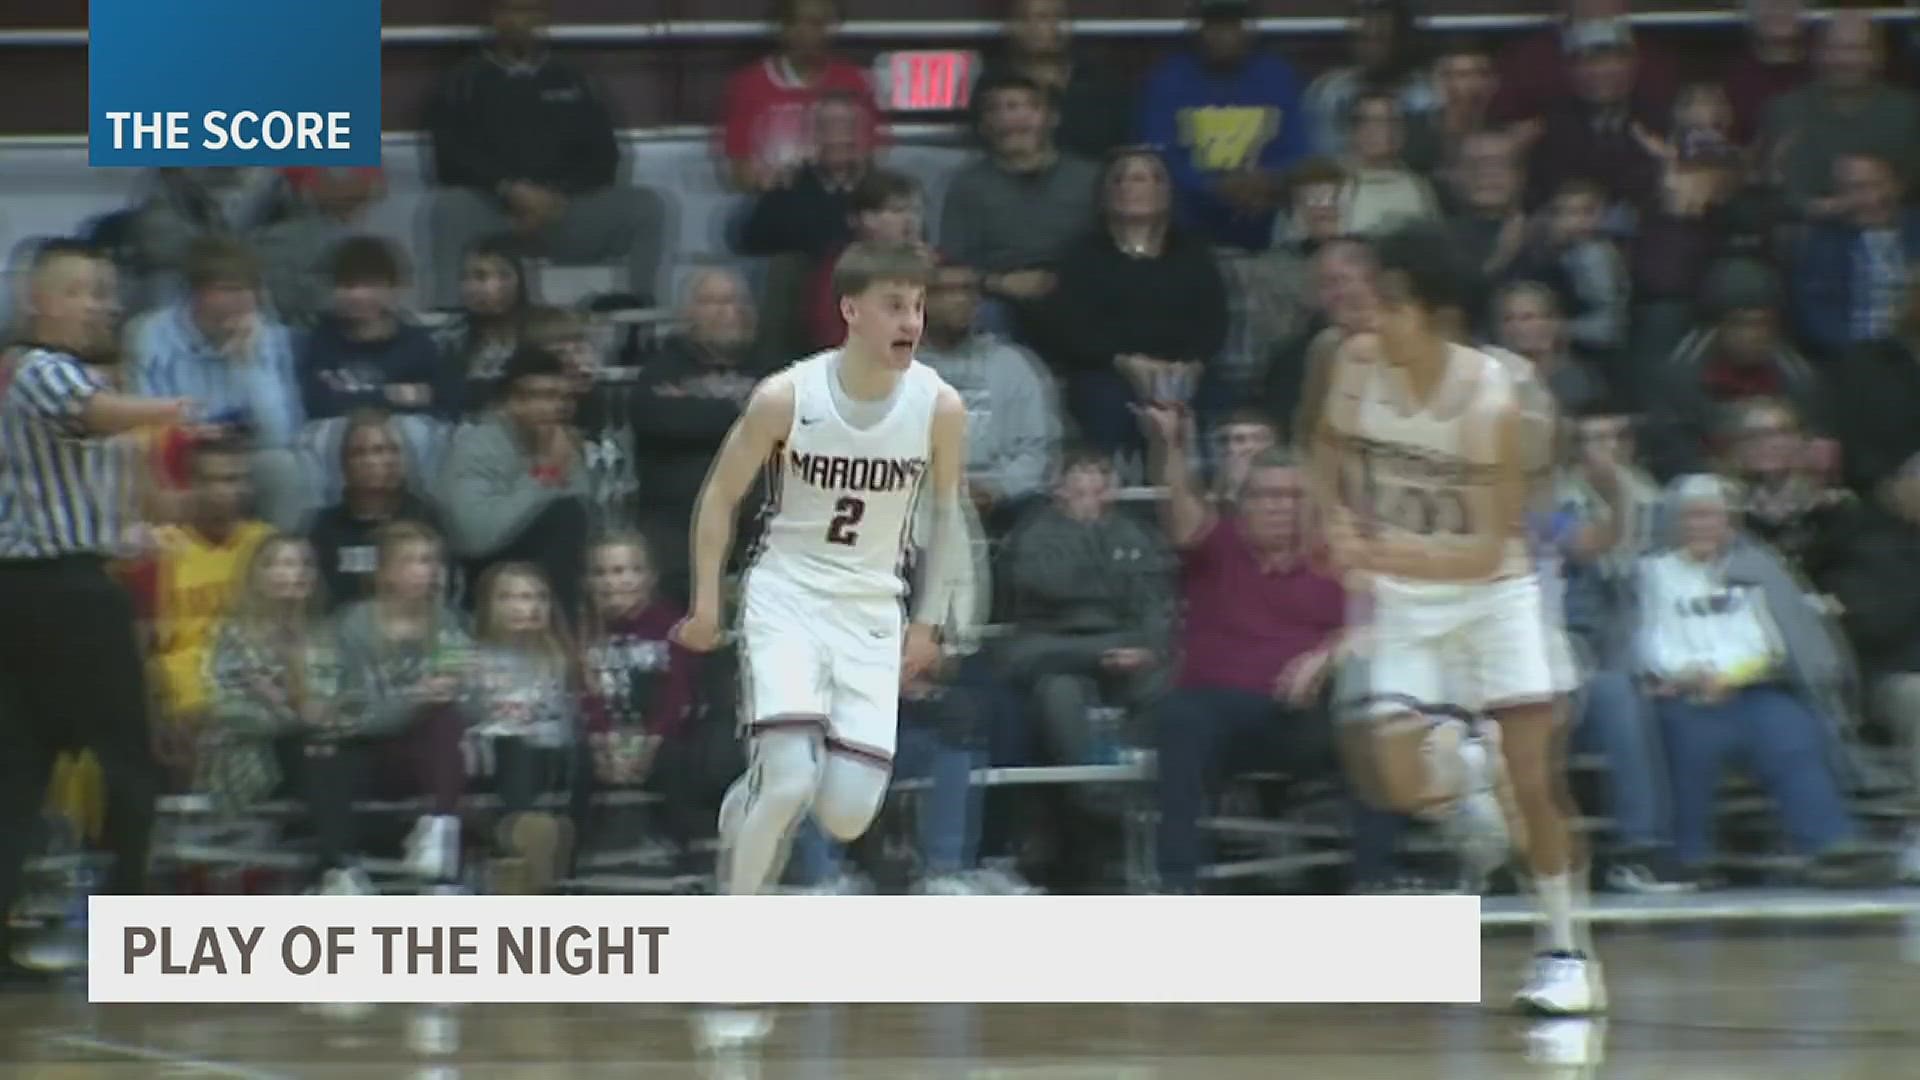 The play of the night goes to the layup that gave Moline's Brock Harding the school's all-time scoring record.